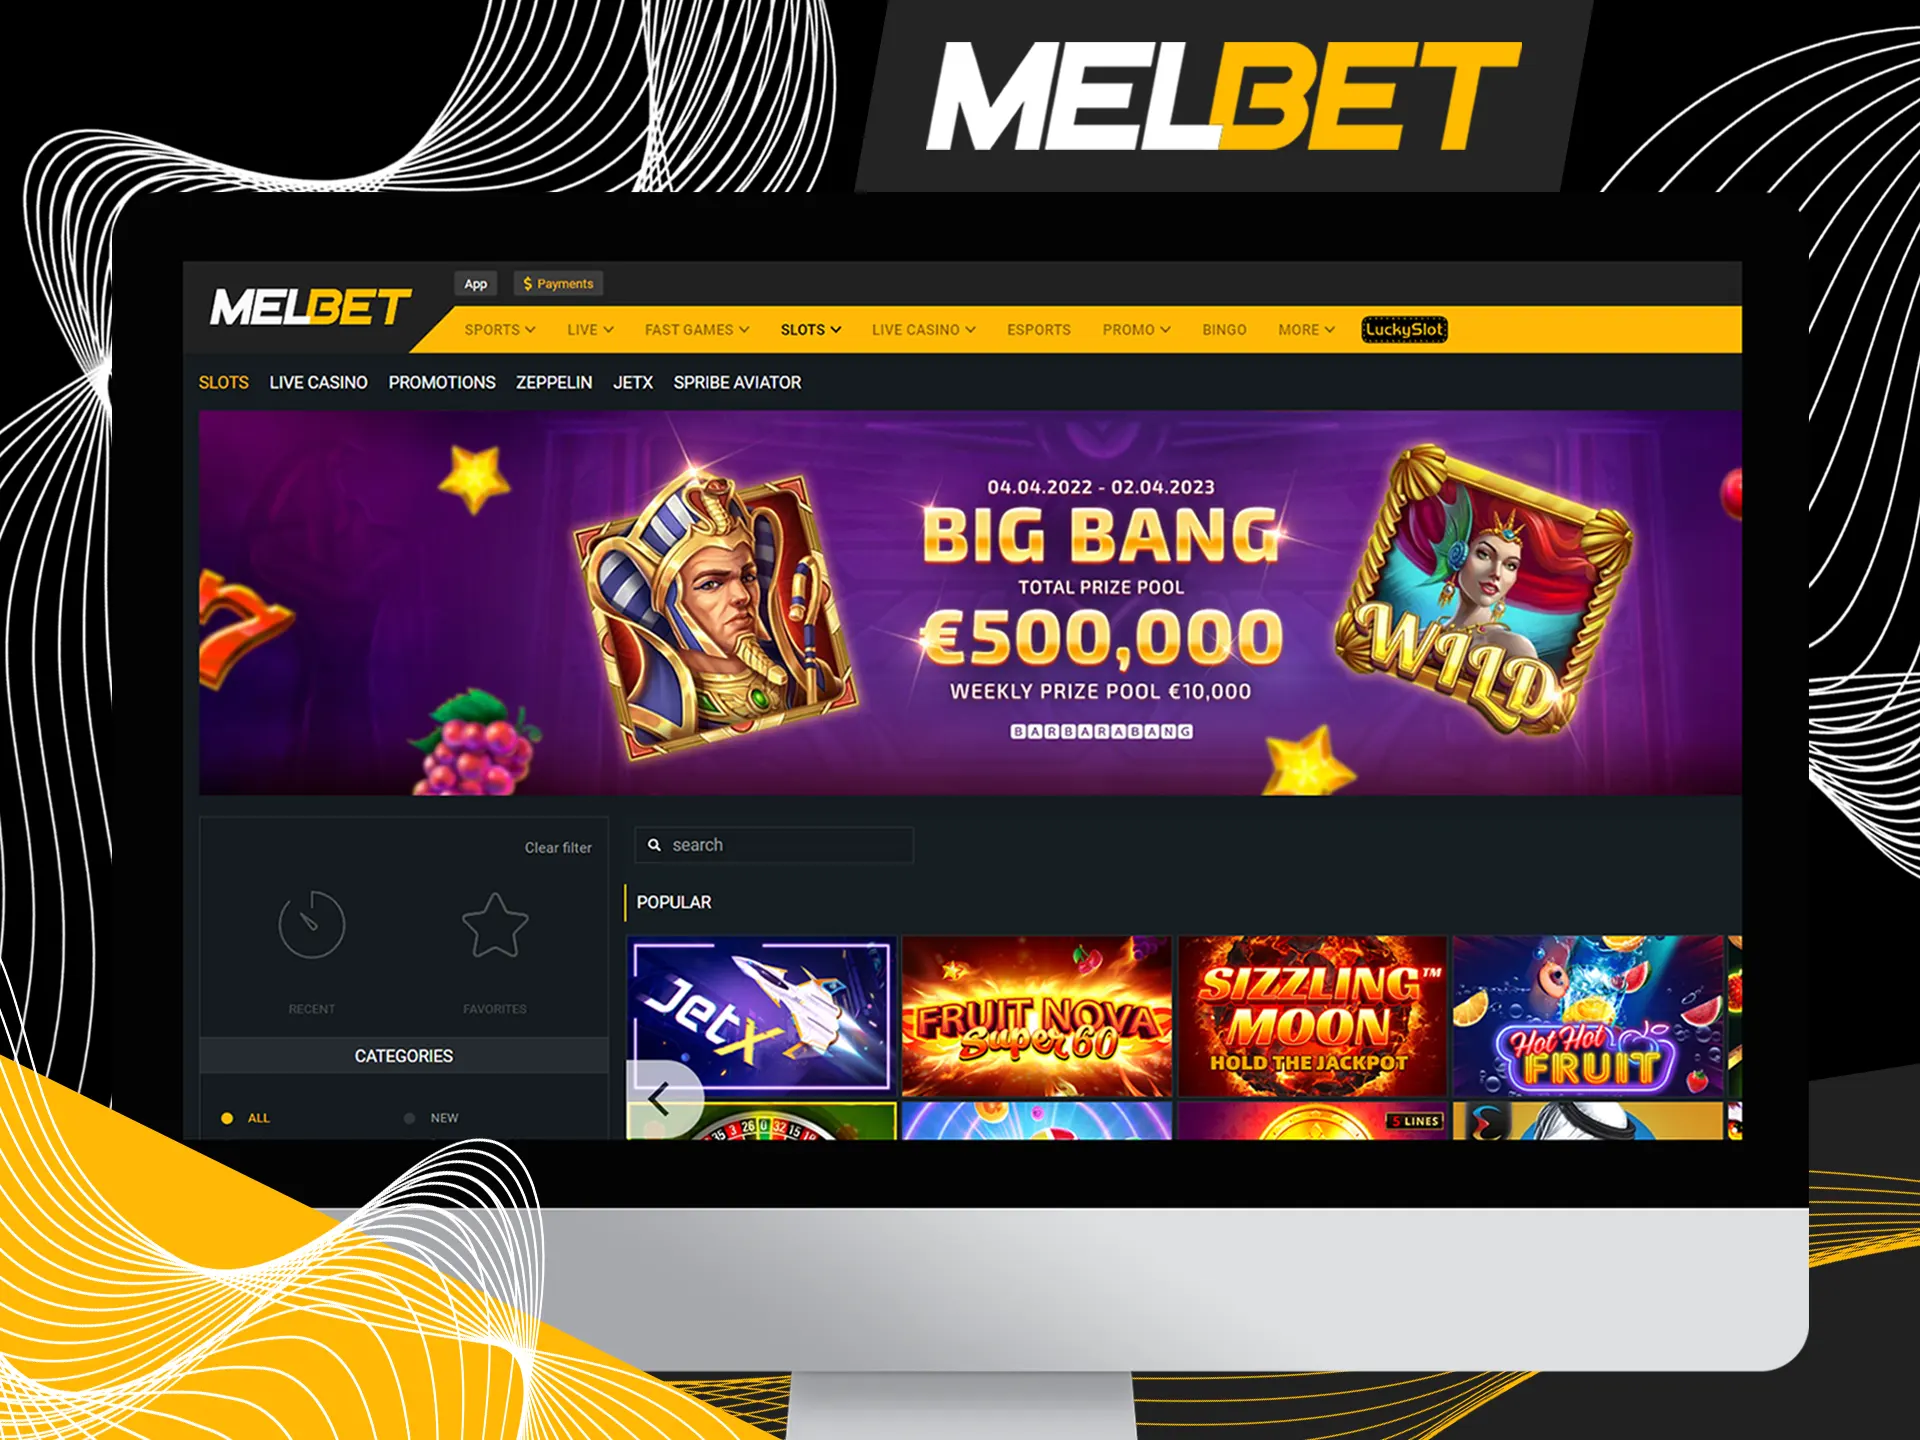 PC version of Melbet website is a best for use.